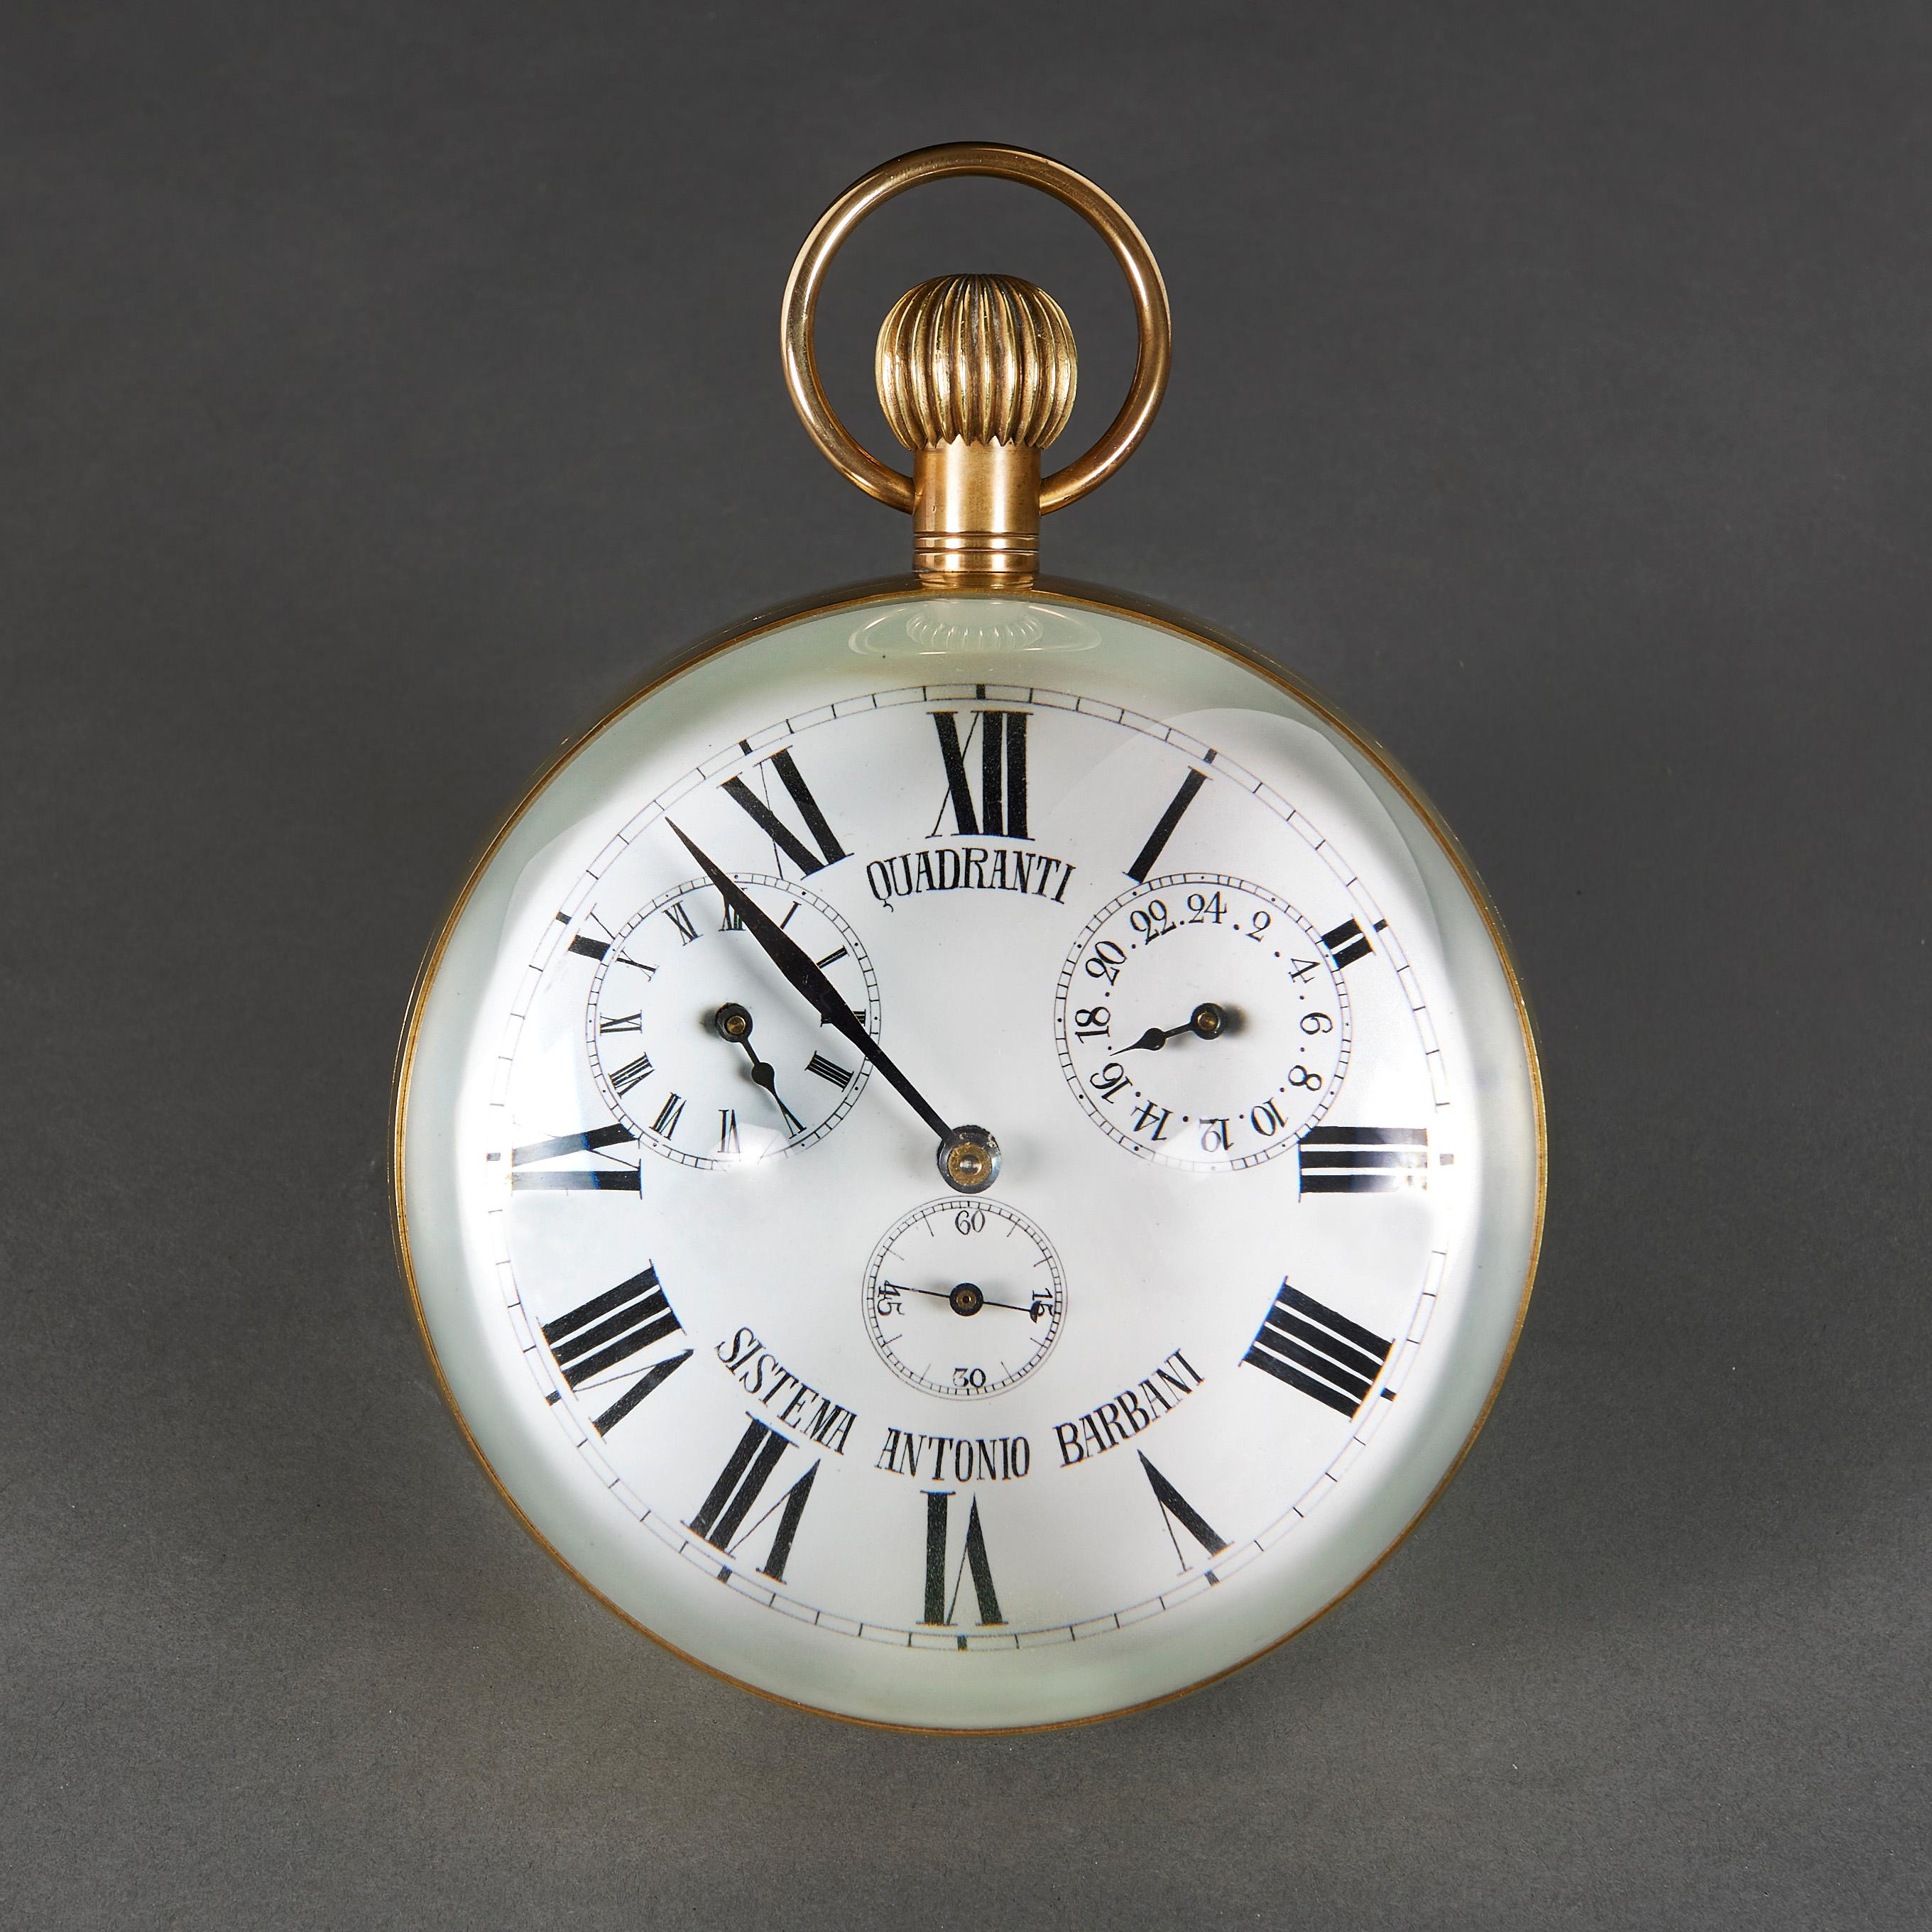 Waltham, Massachusetts, USA, Early 20th century.

A fine giant ball desk clock in brass and glass, made for the Italian market, with ‘Quadranti’ four dial face, separating the hours, minutes, seconds and the 24hour clock, with eight day American